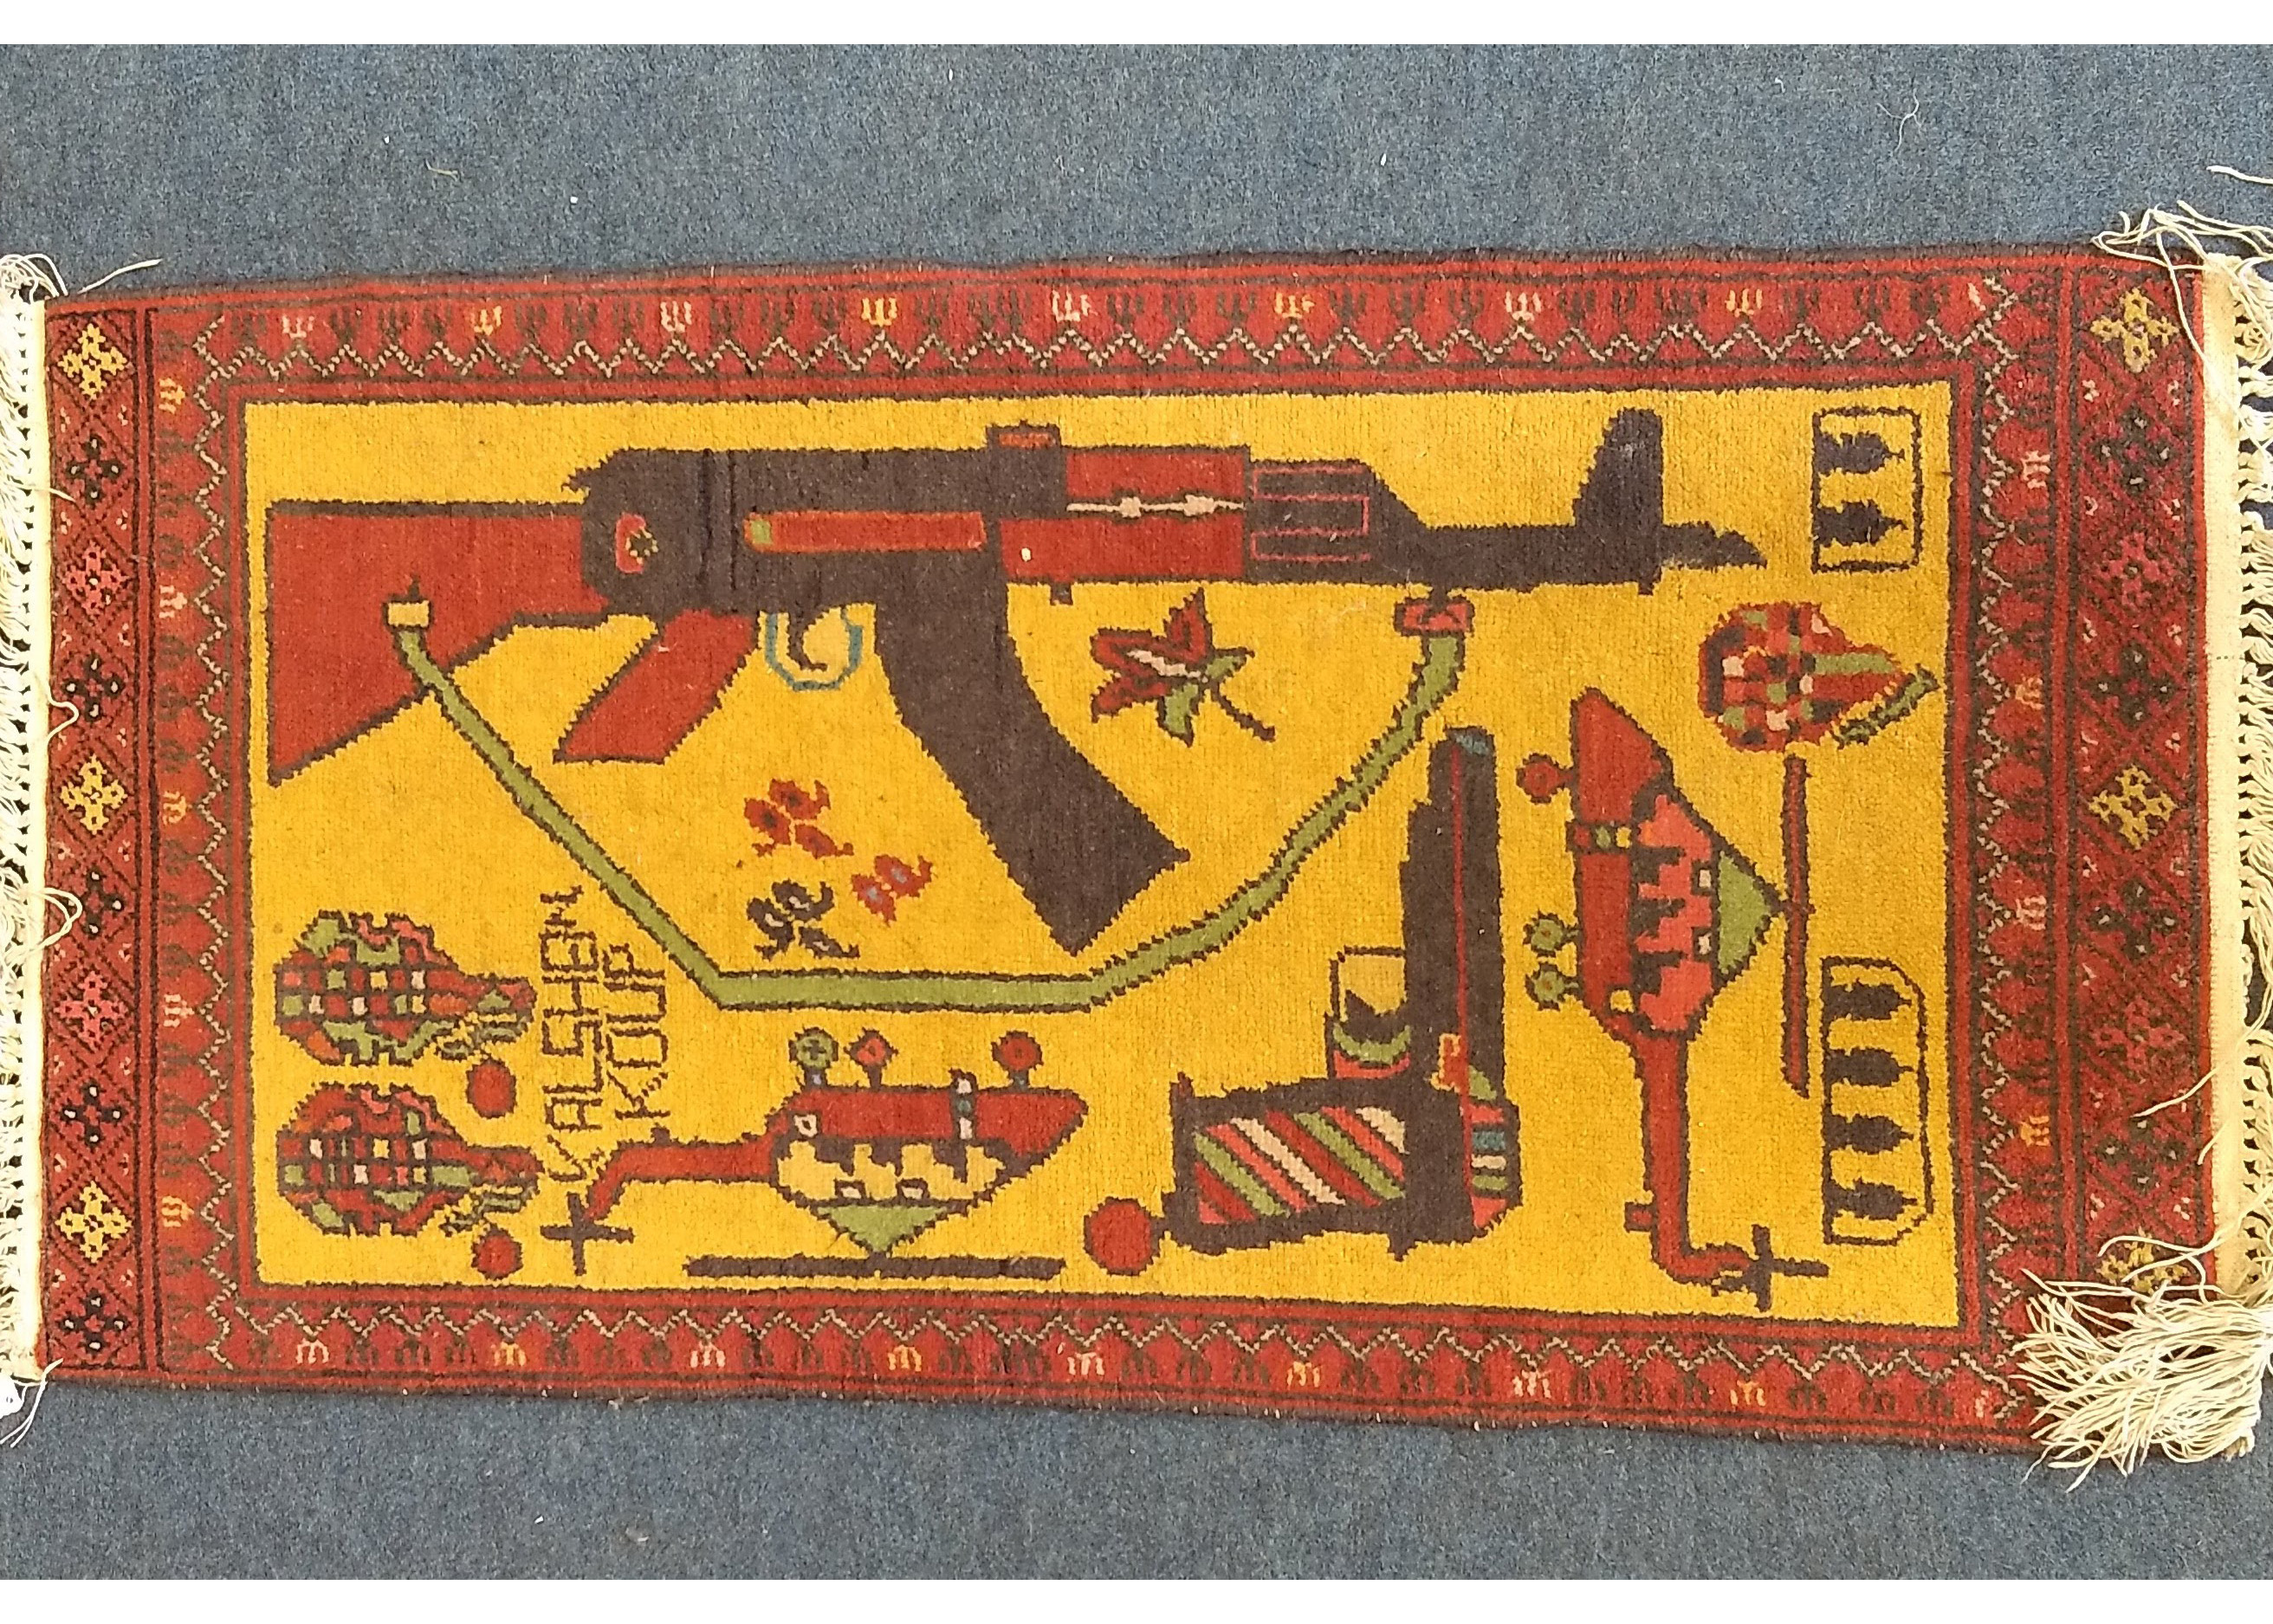 An Afghan woollen war rug, helicopter, guns and grenades on yellow ground, red patterned border, 100